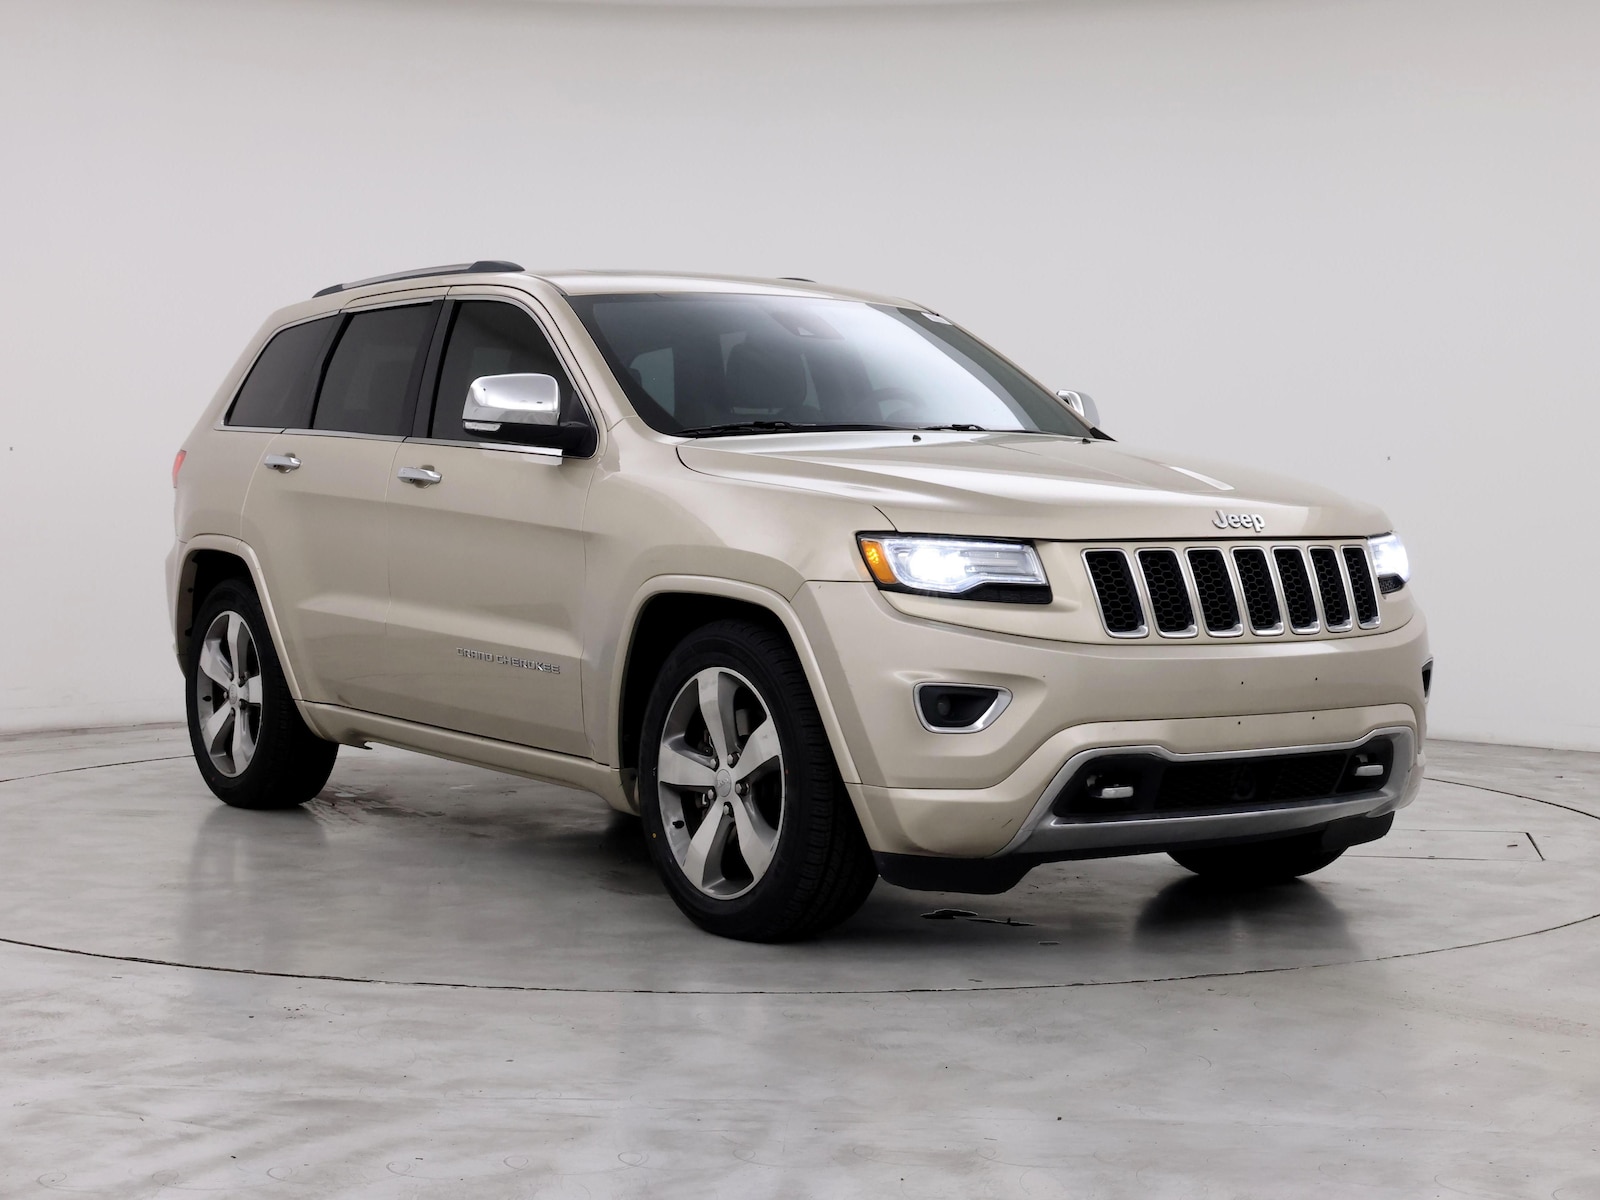 Used 2014 Jeep Grand Cherokee Overland with VIN 1C4RJFCM7EC324011 for sale in Kenosha, WI